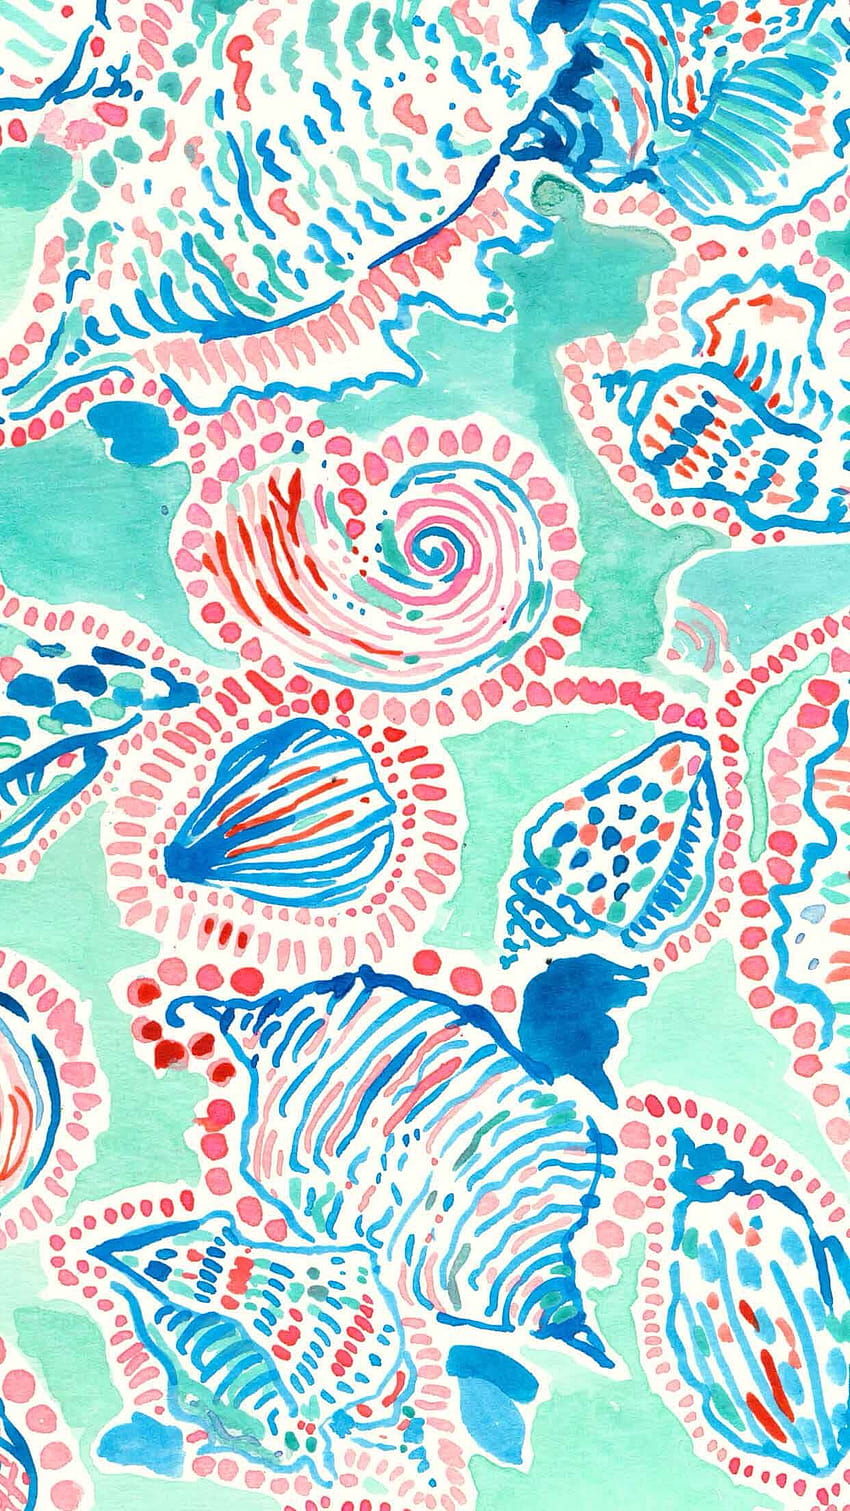 Lilly Pulitzer ☆ Find more watercolor + at @pretty, preppy iphone HD phone wallpaper